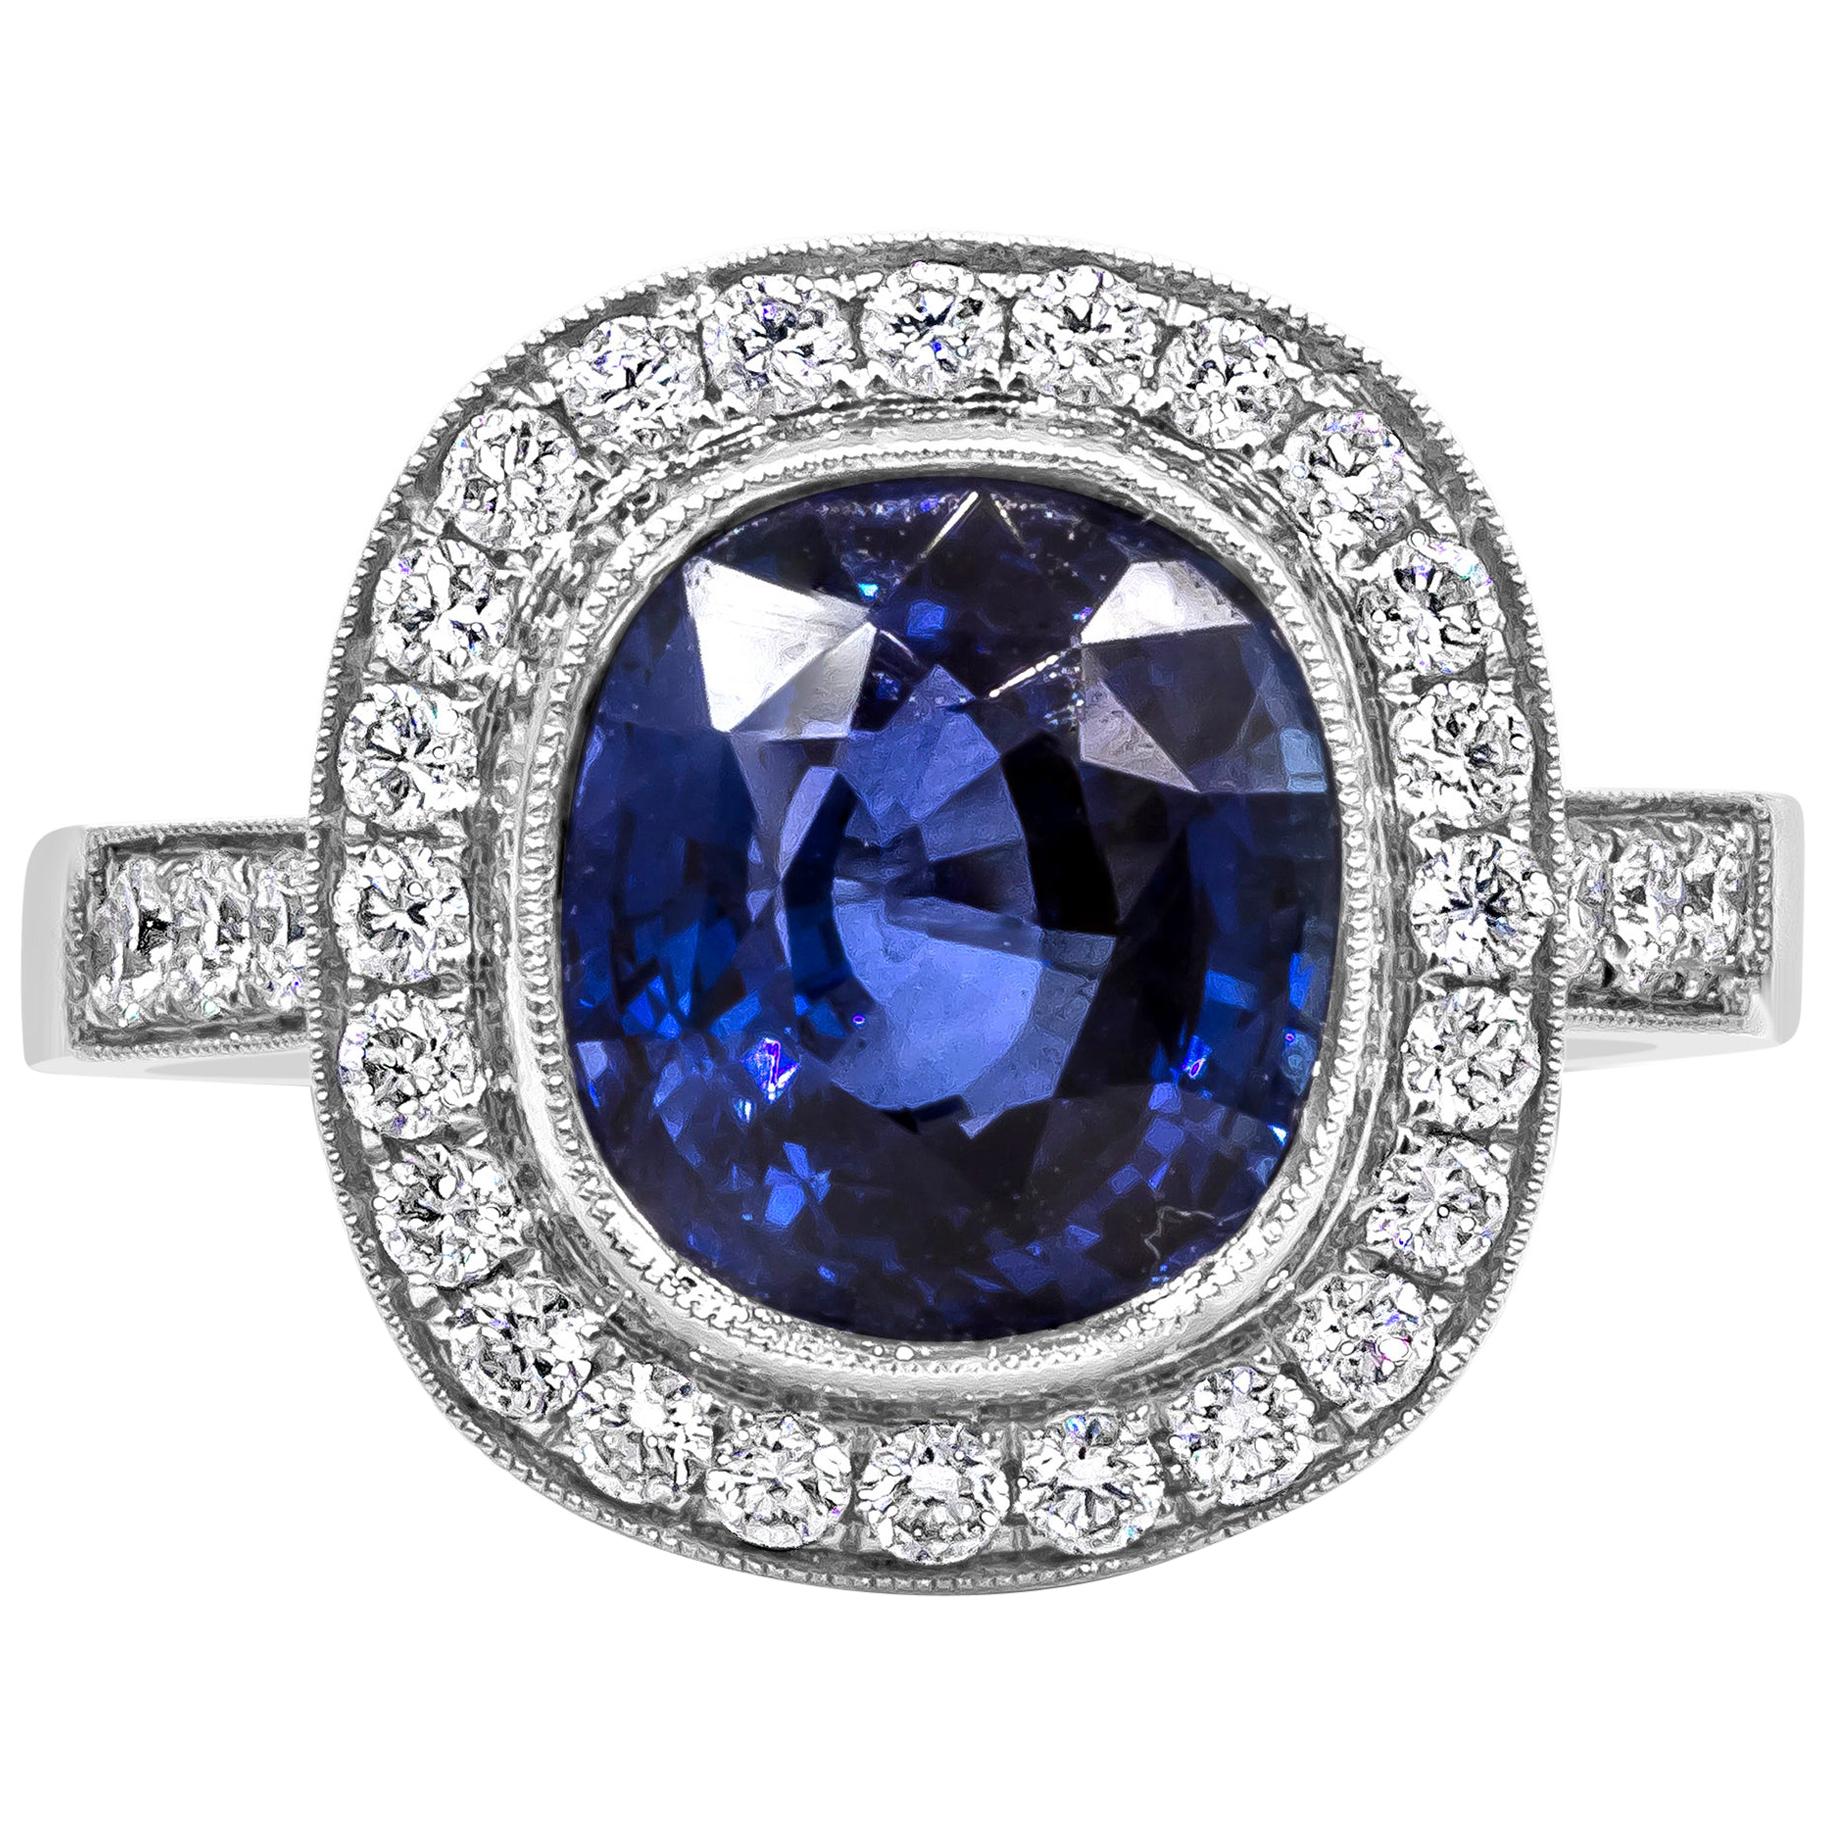 4.12 Carats Cushion Cut Royal Blue Sapphire with Diamond Halo Engagement Ring For Sale